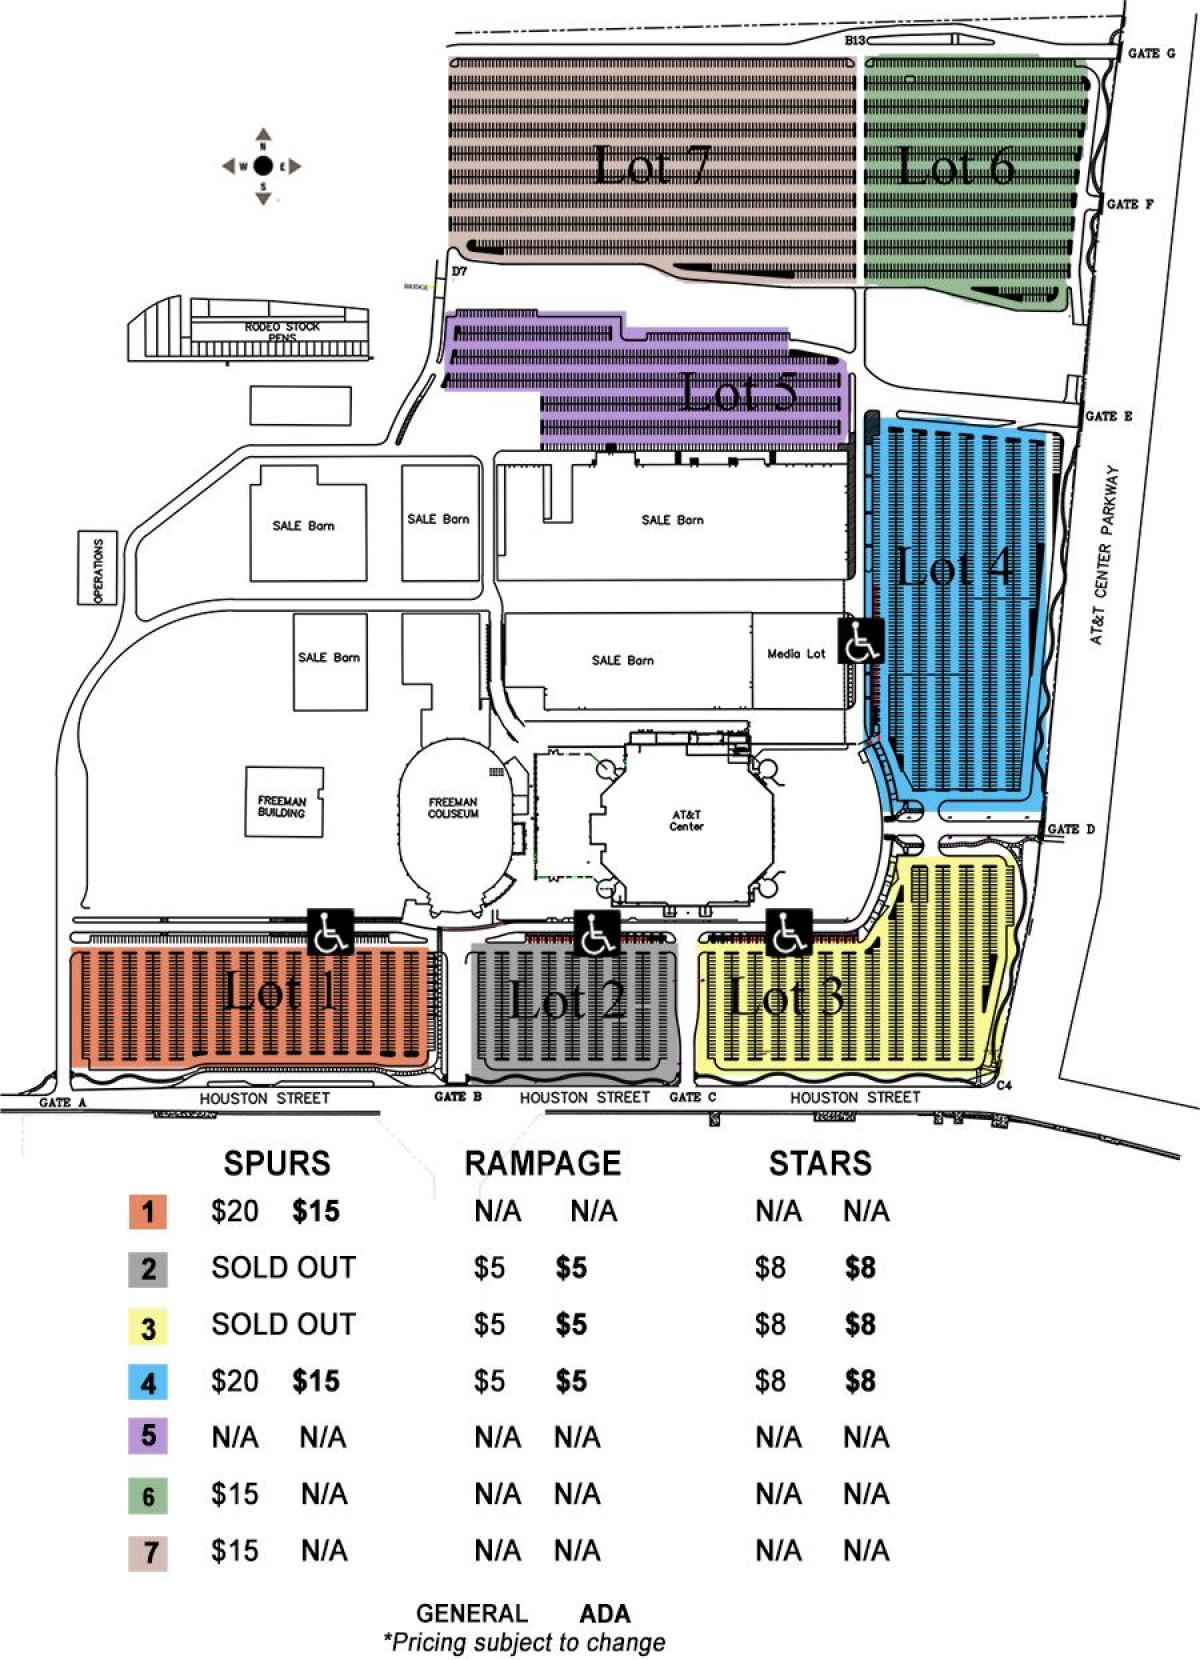 AT&T parking map